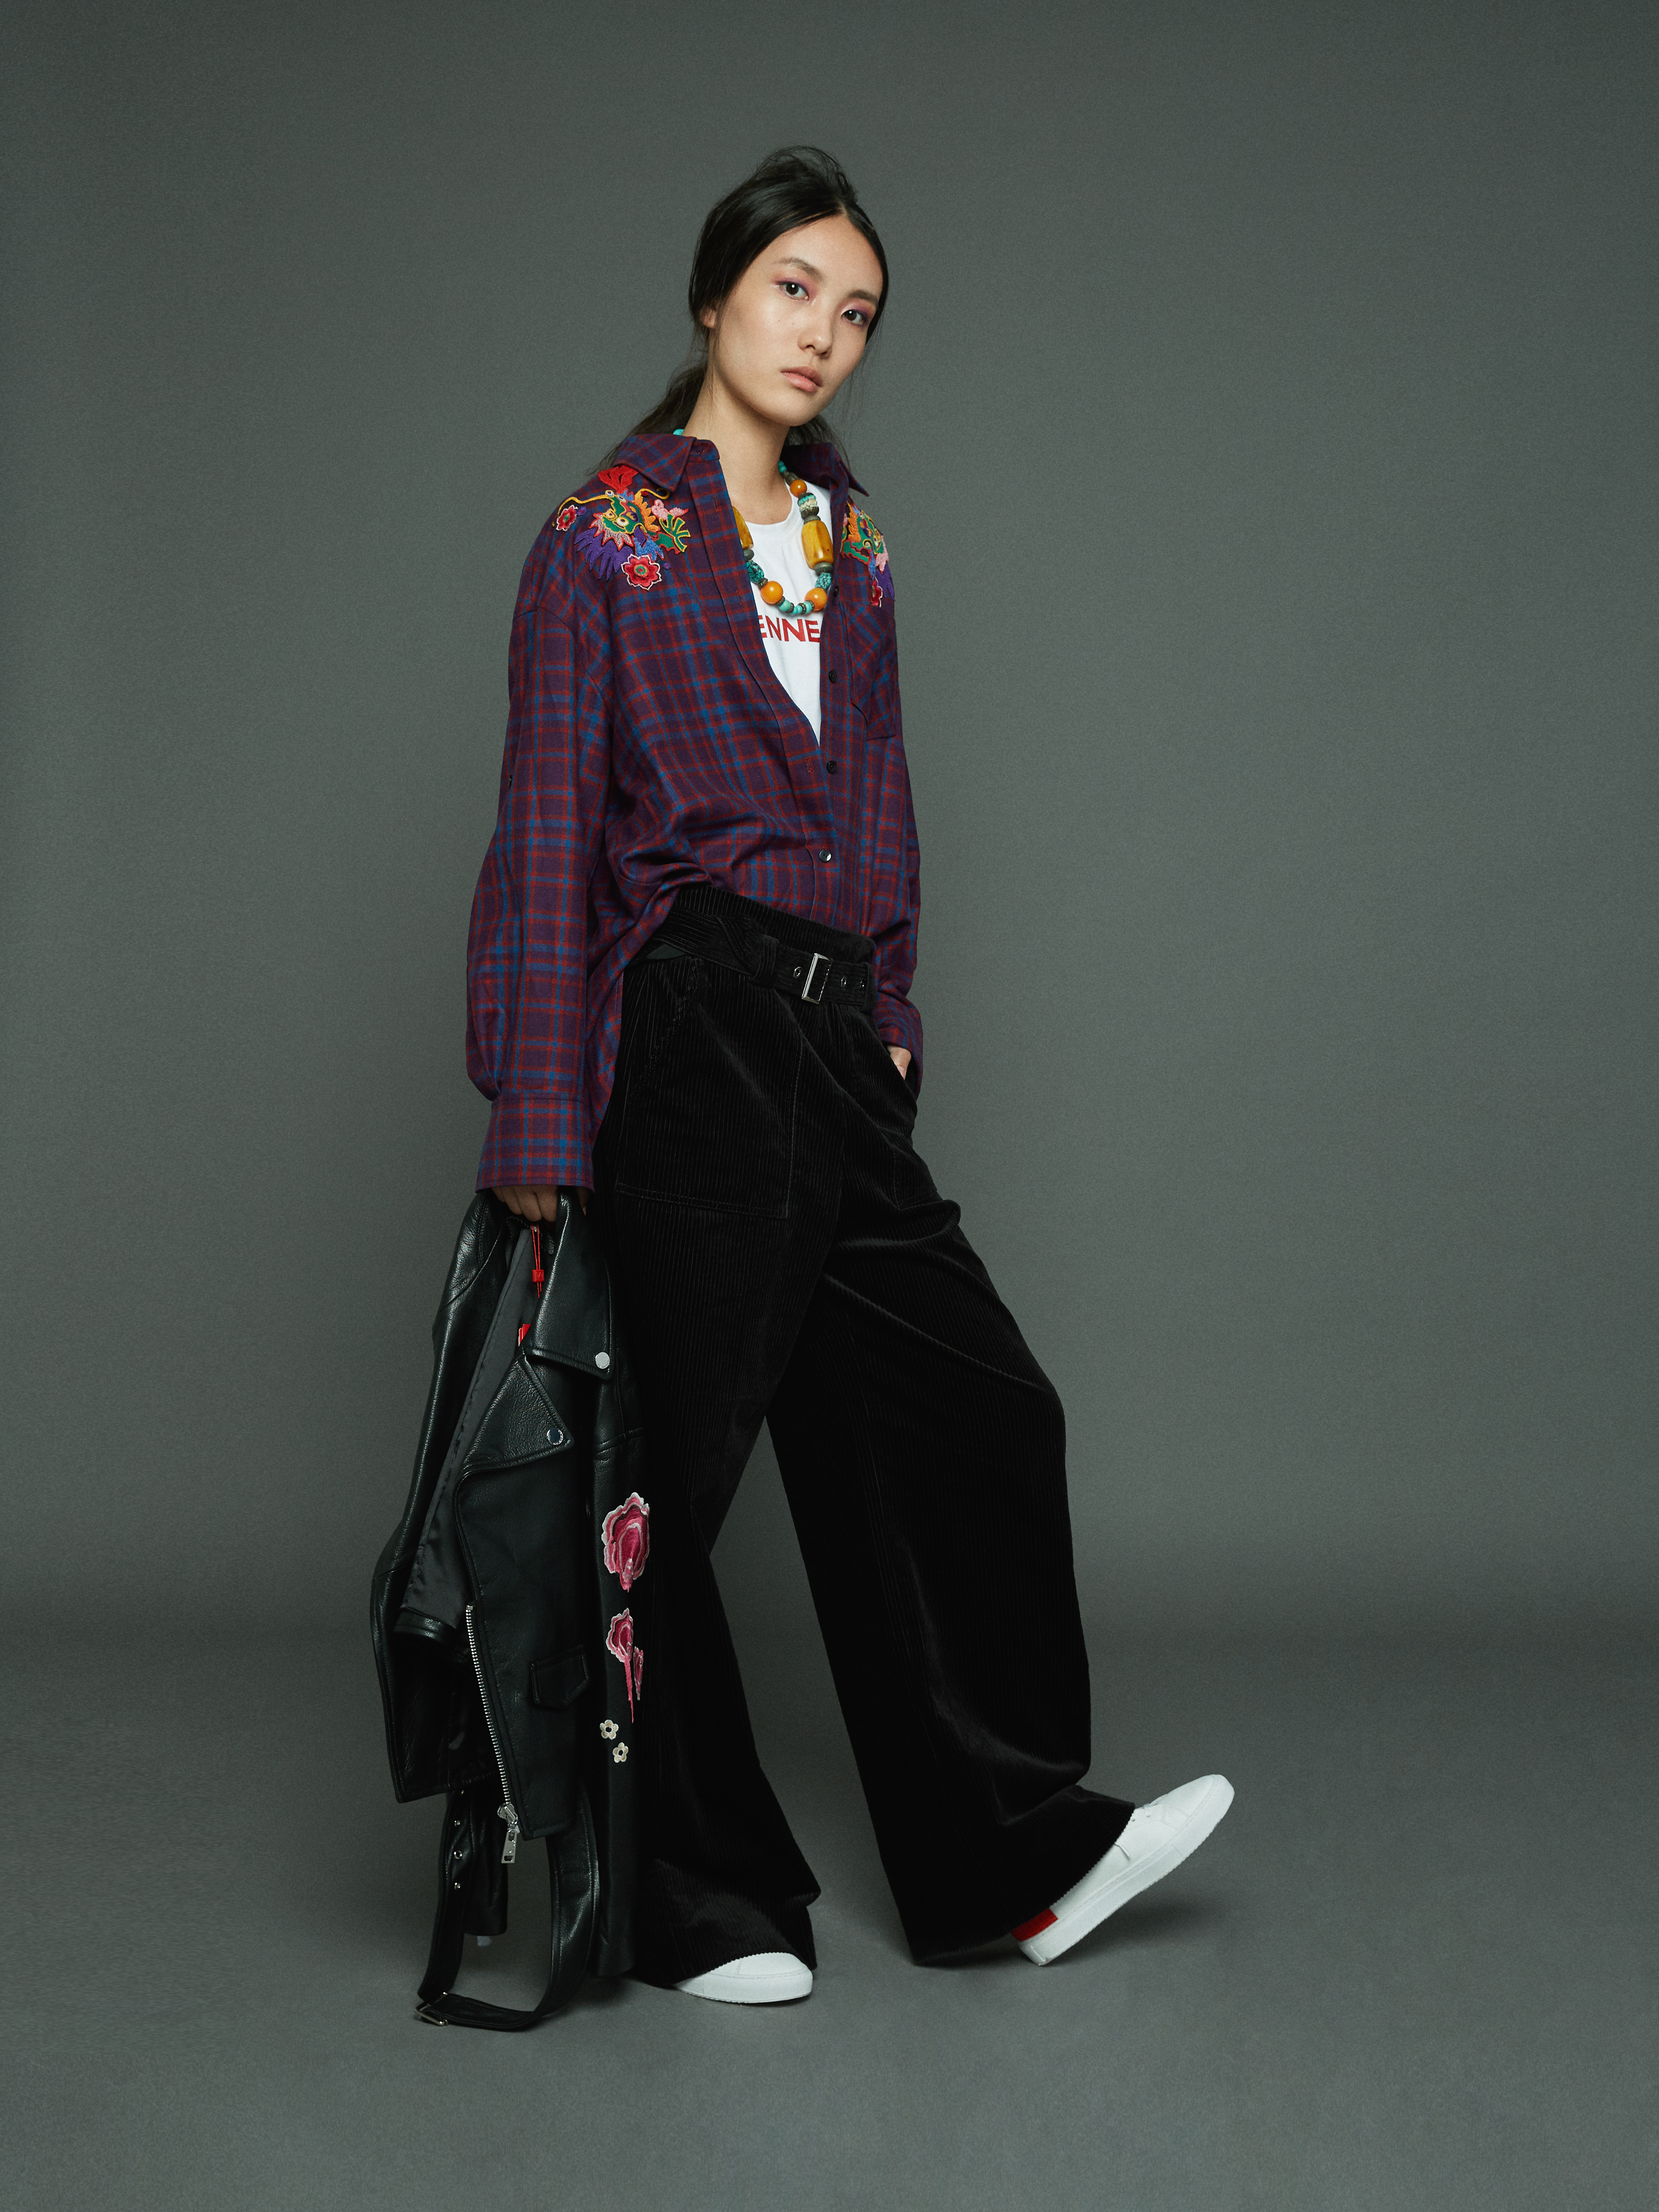 Vivienne Tam Fall/Winter 2018 Collection